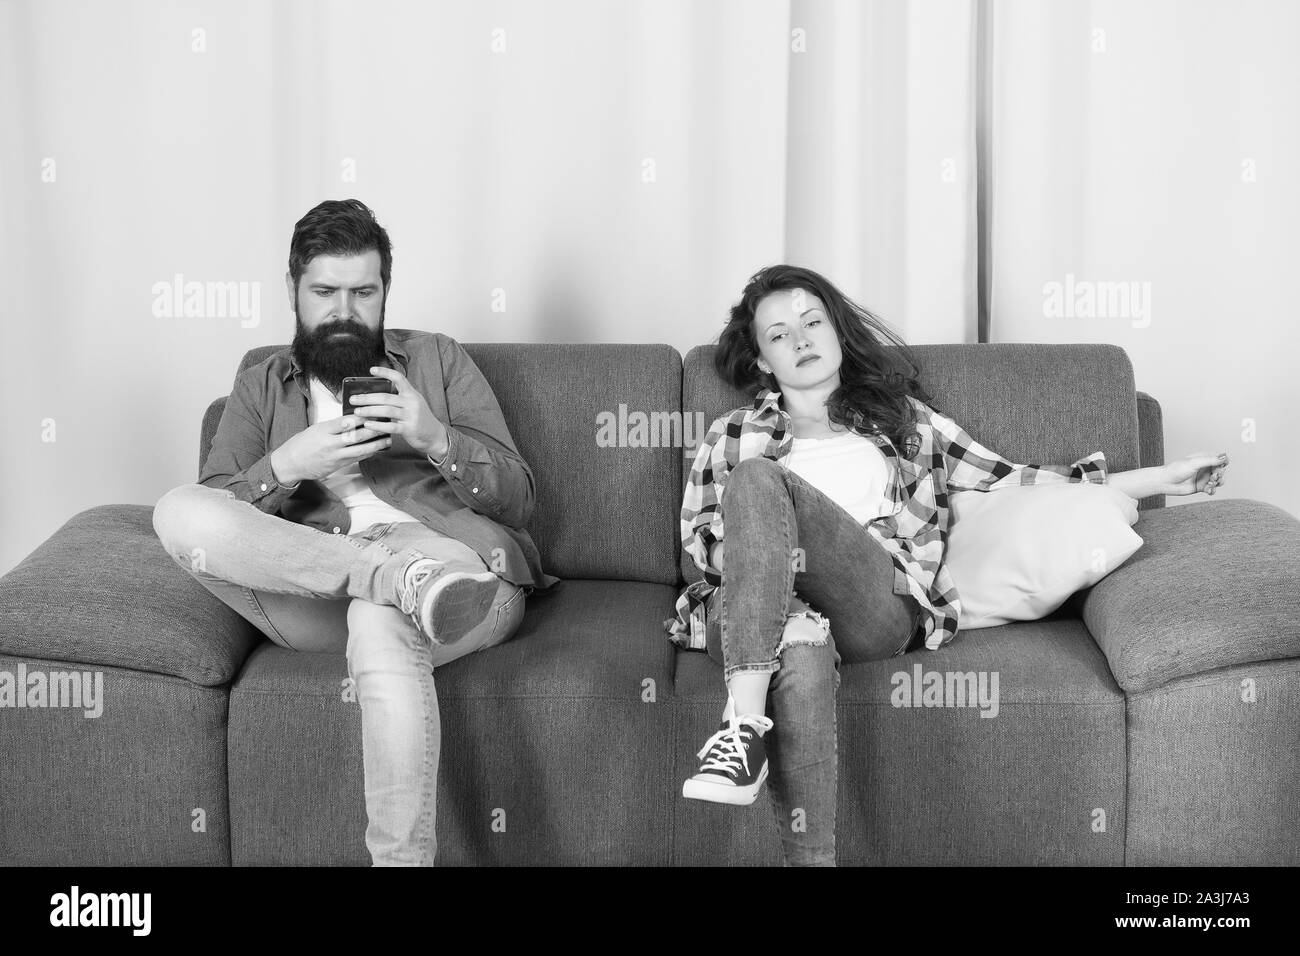 Mobile gadget dependence. Man bearded hipster play smartphone while girlfriend relaxing near. Internet surfing and social networks. Mobile internet addiction. Husband addicted internet online games. Stock Photo